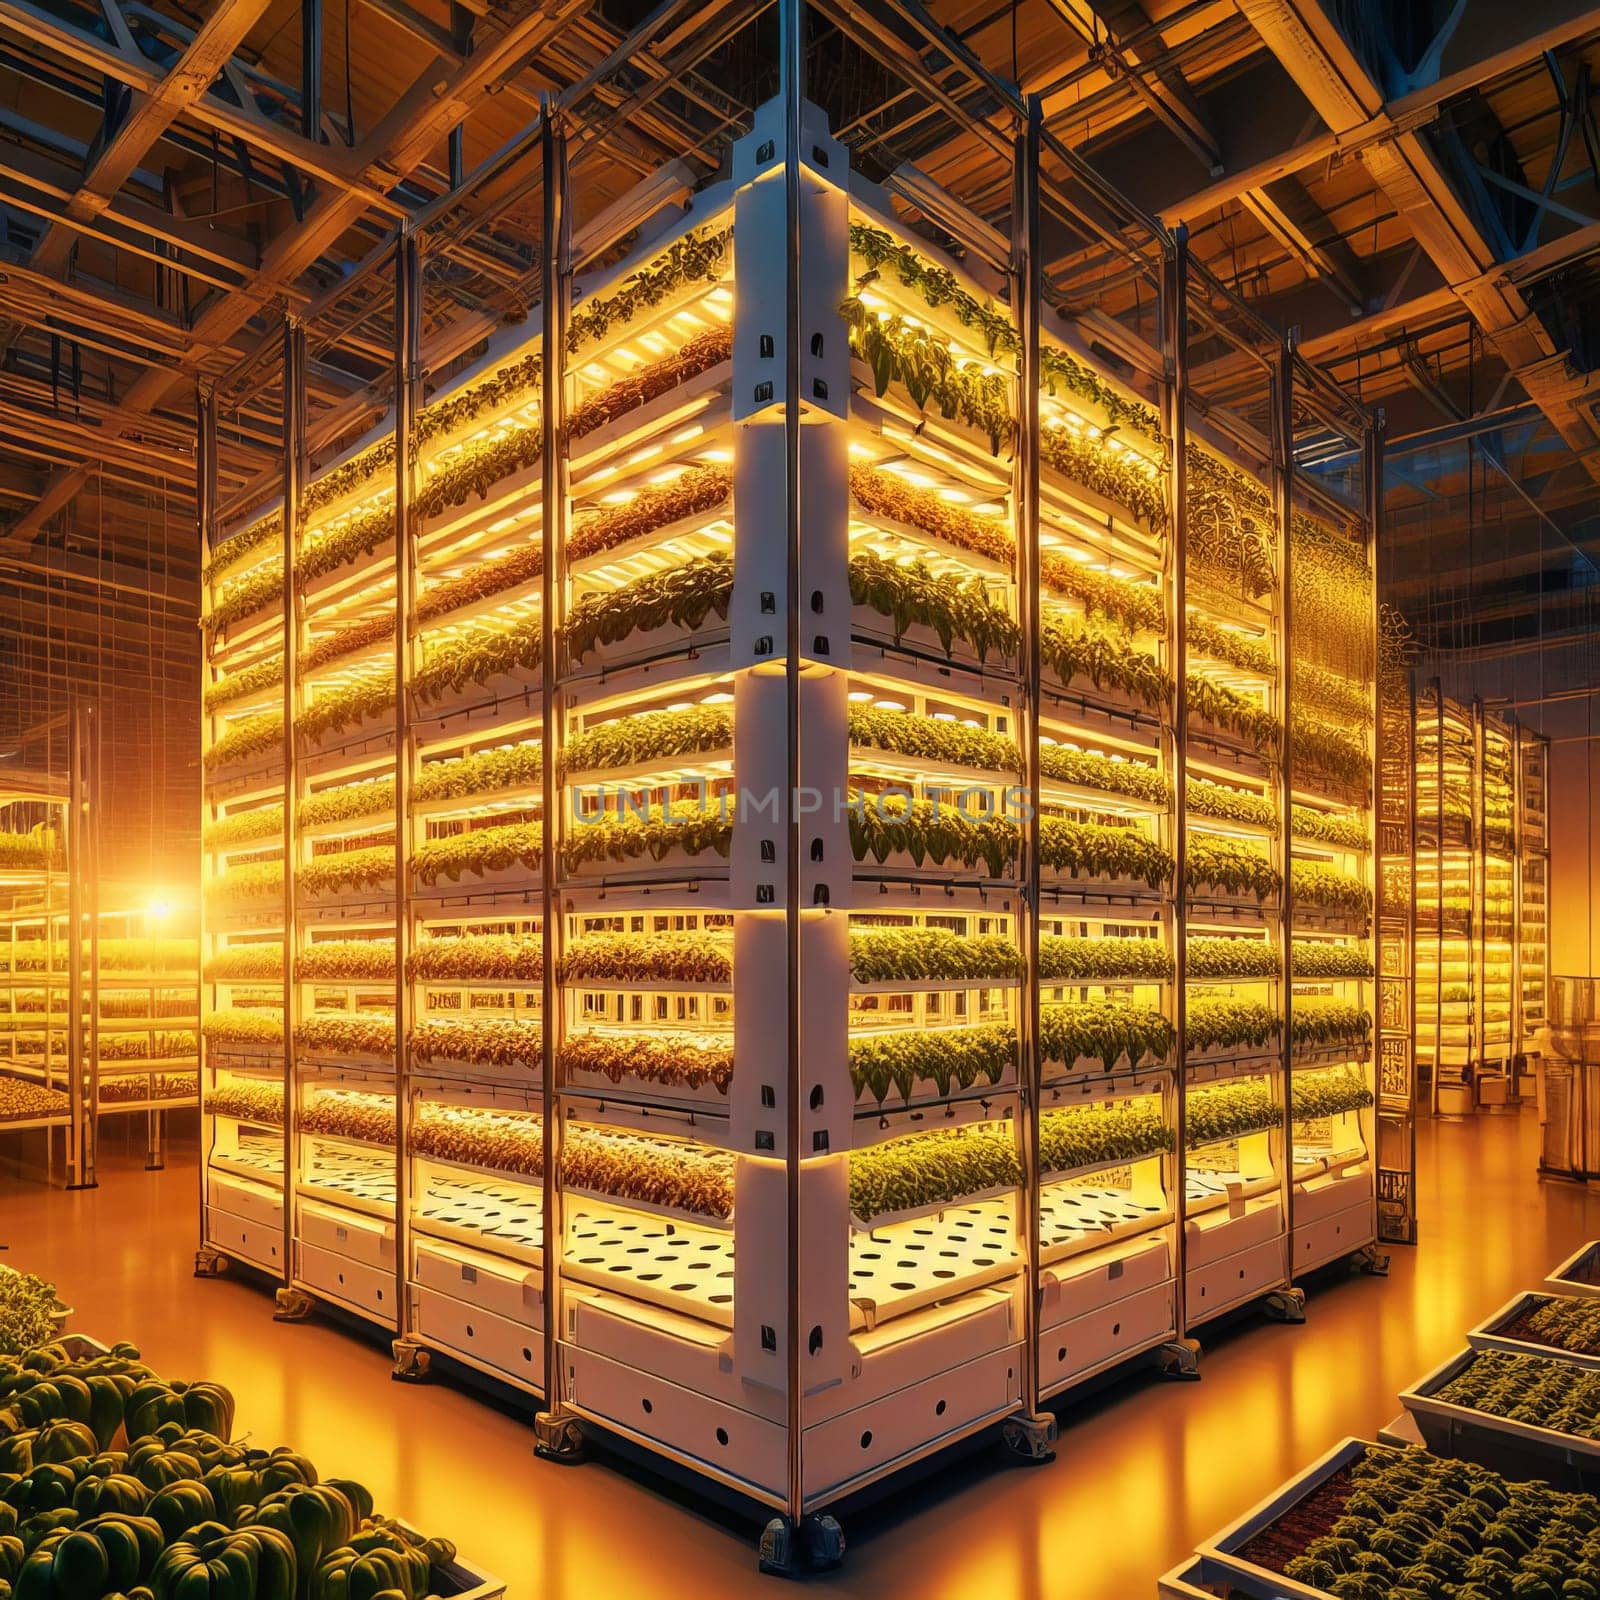 A massive warehouse with wooden shelves filled with plant supplies by DCStudio